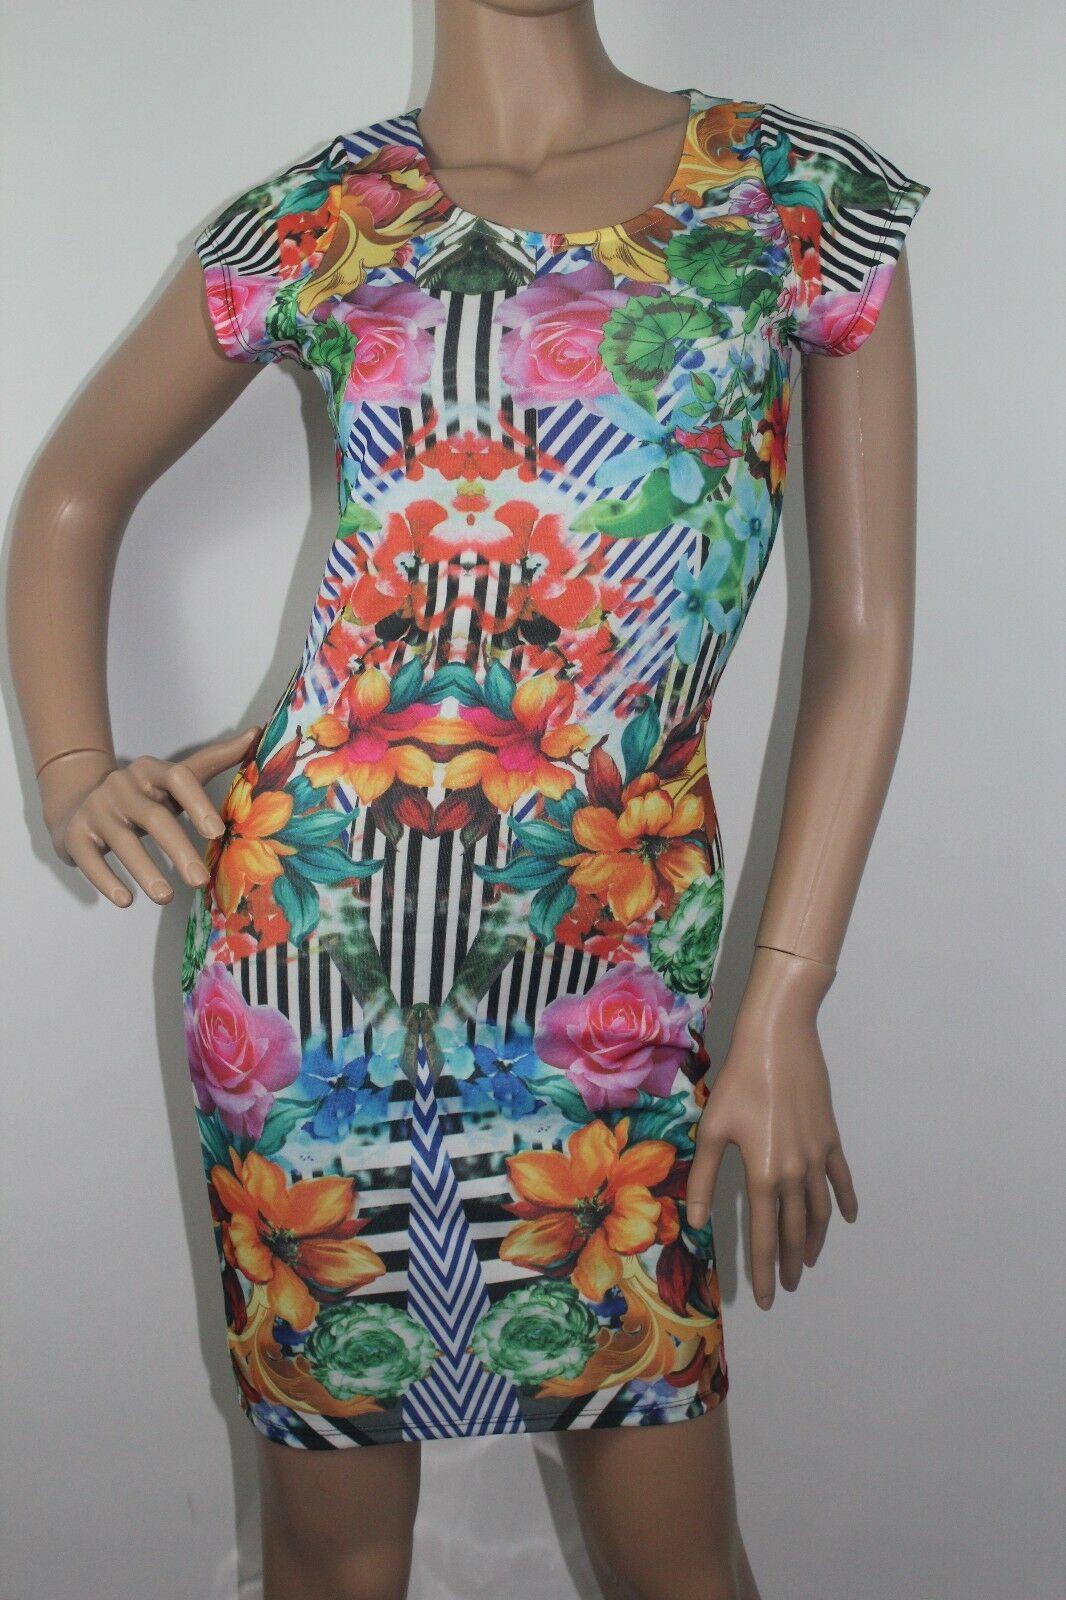 5th & LOVE NWT Cut Out Back Women's Dress Short Sleeve Multicolor Size M - SVNYFancy